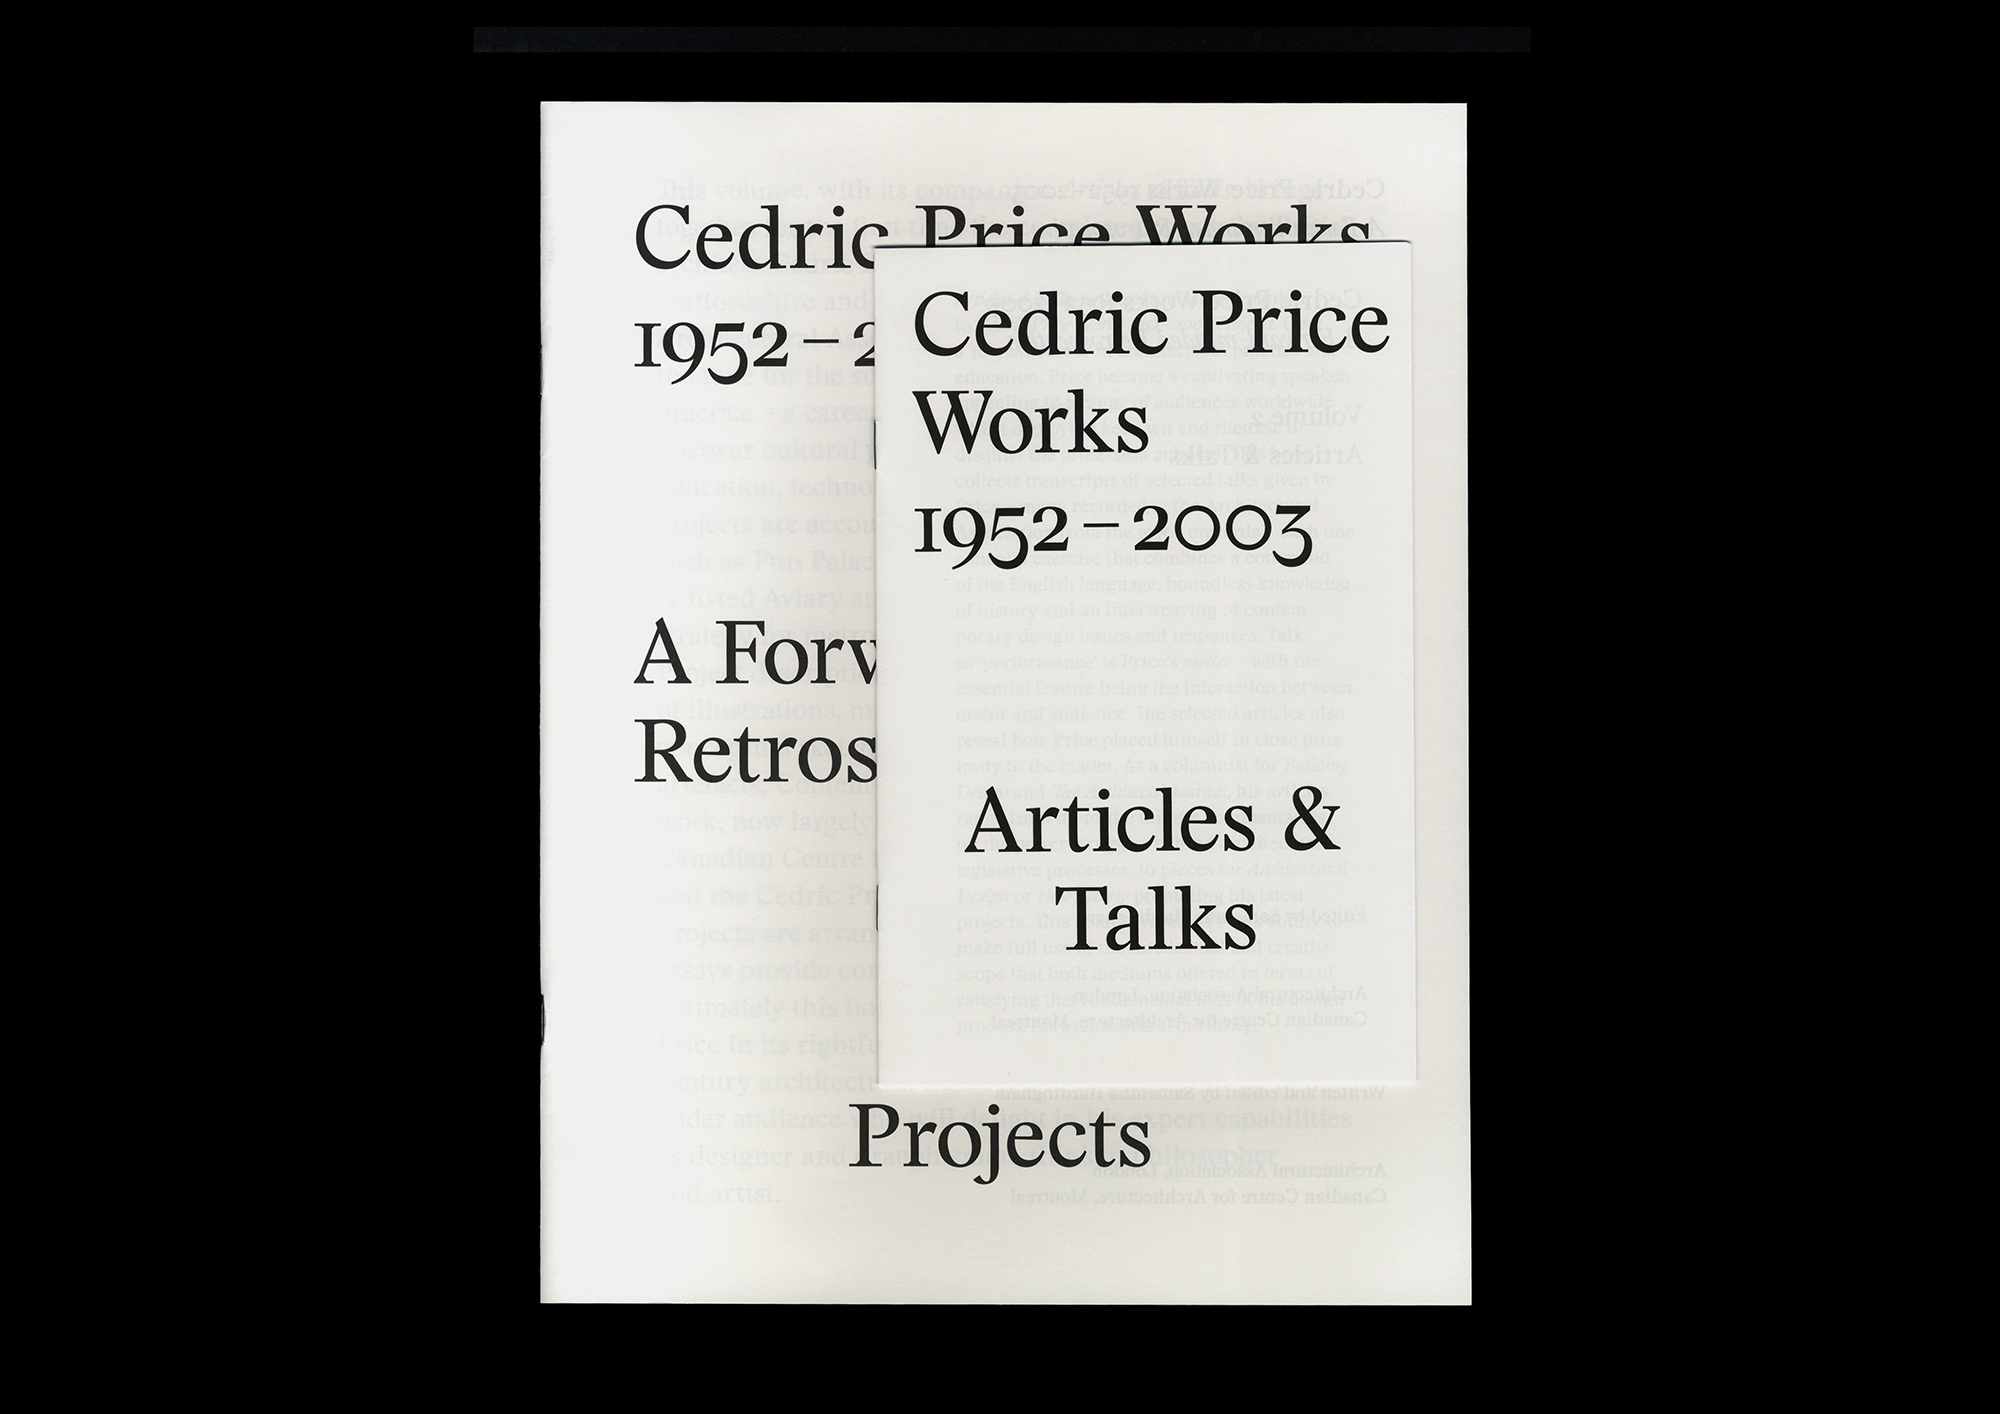 Cover image: Cedric Price Works preview catalogue (2014)